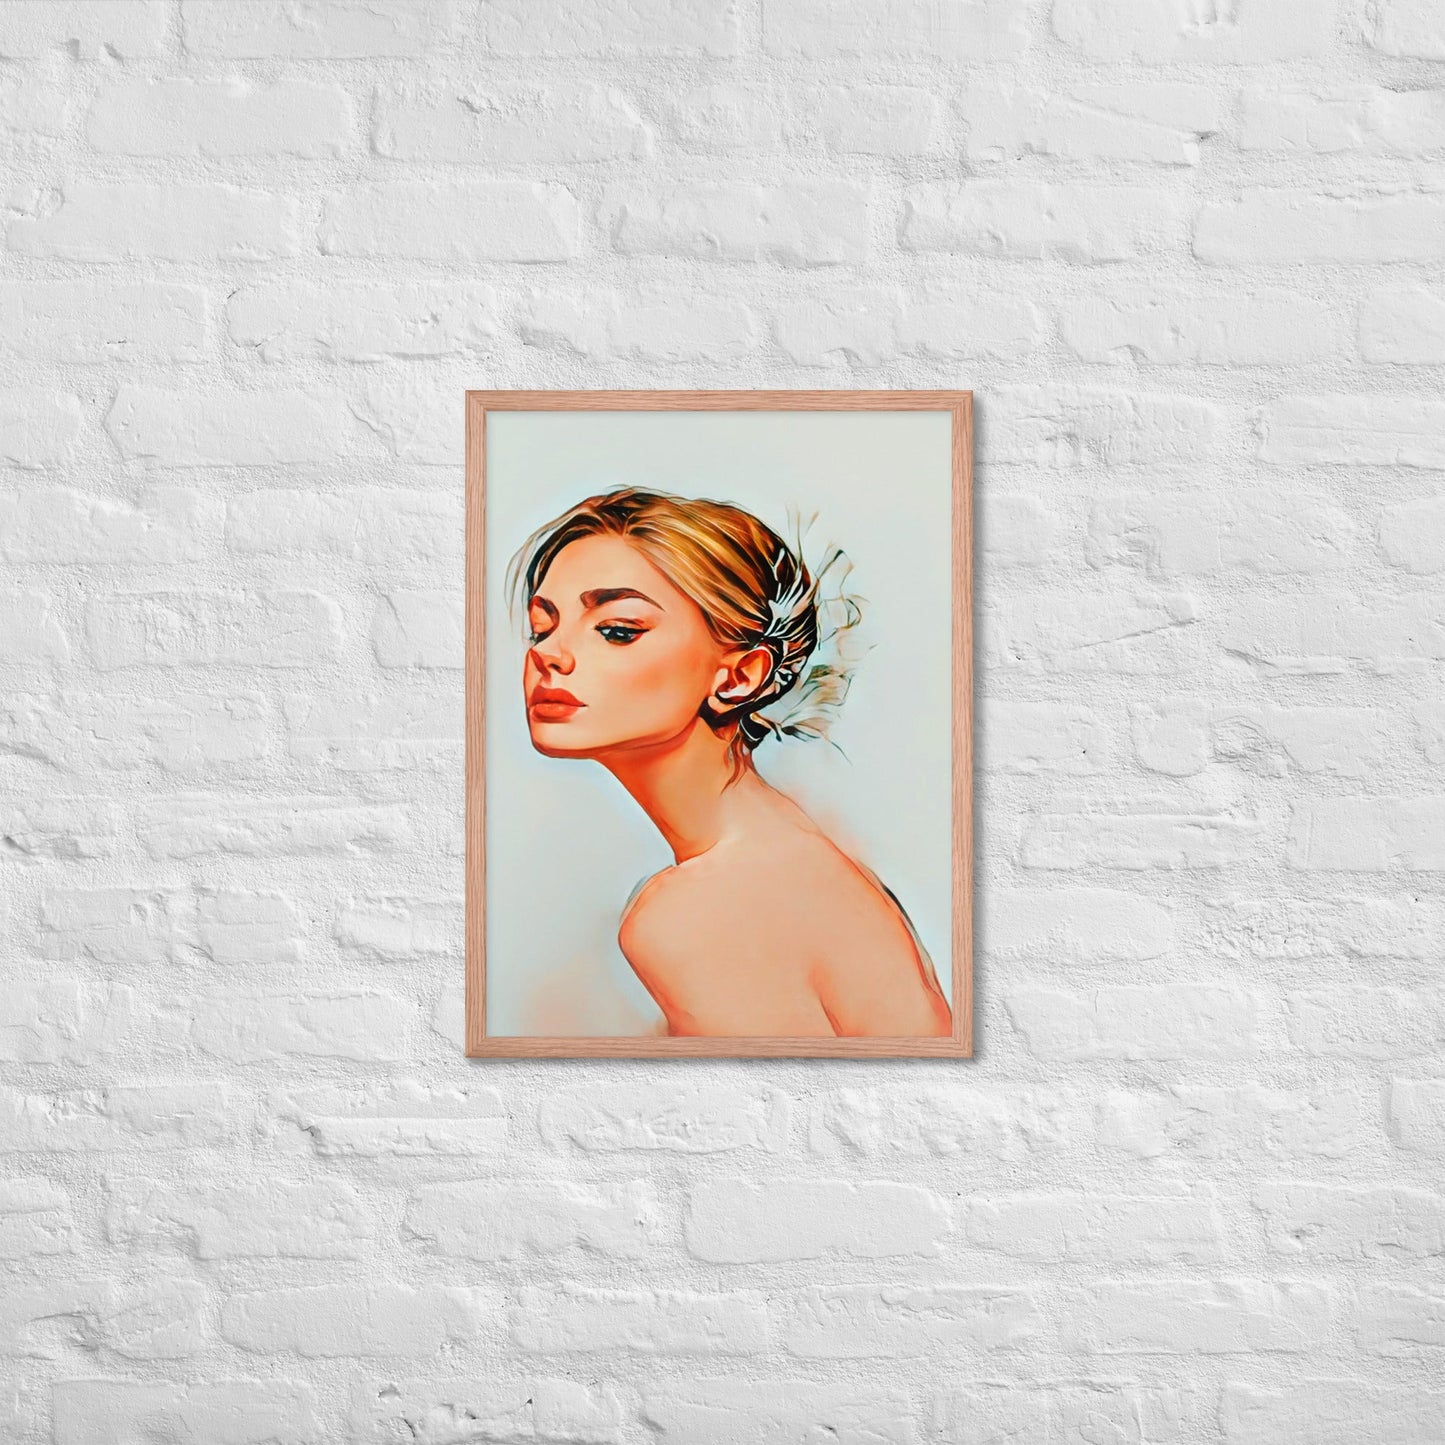 REMEMBER ME Wall Art Framed Poster - BONOTEE